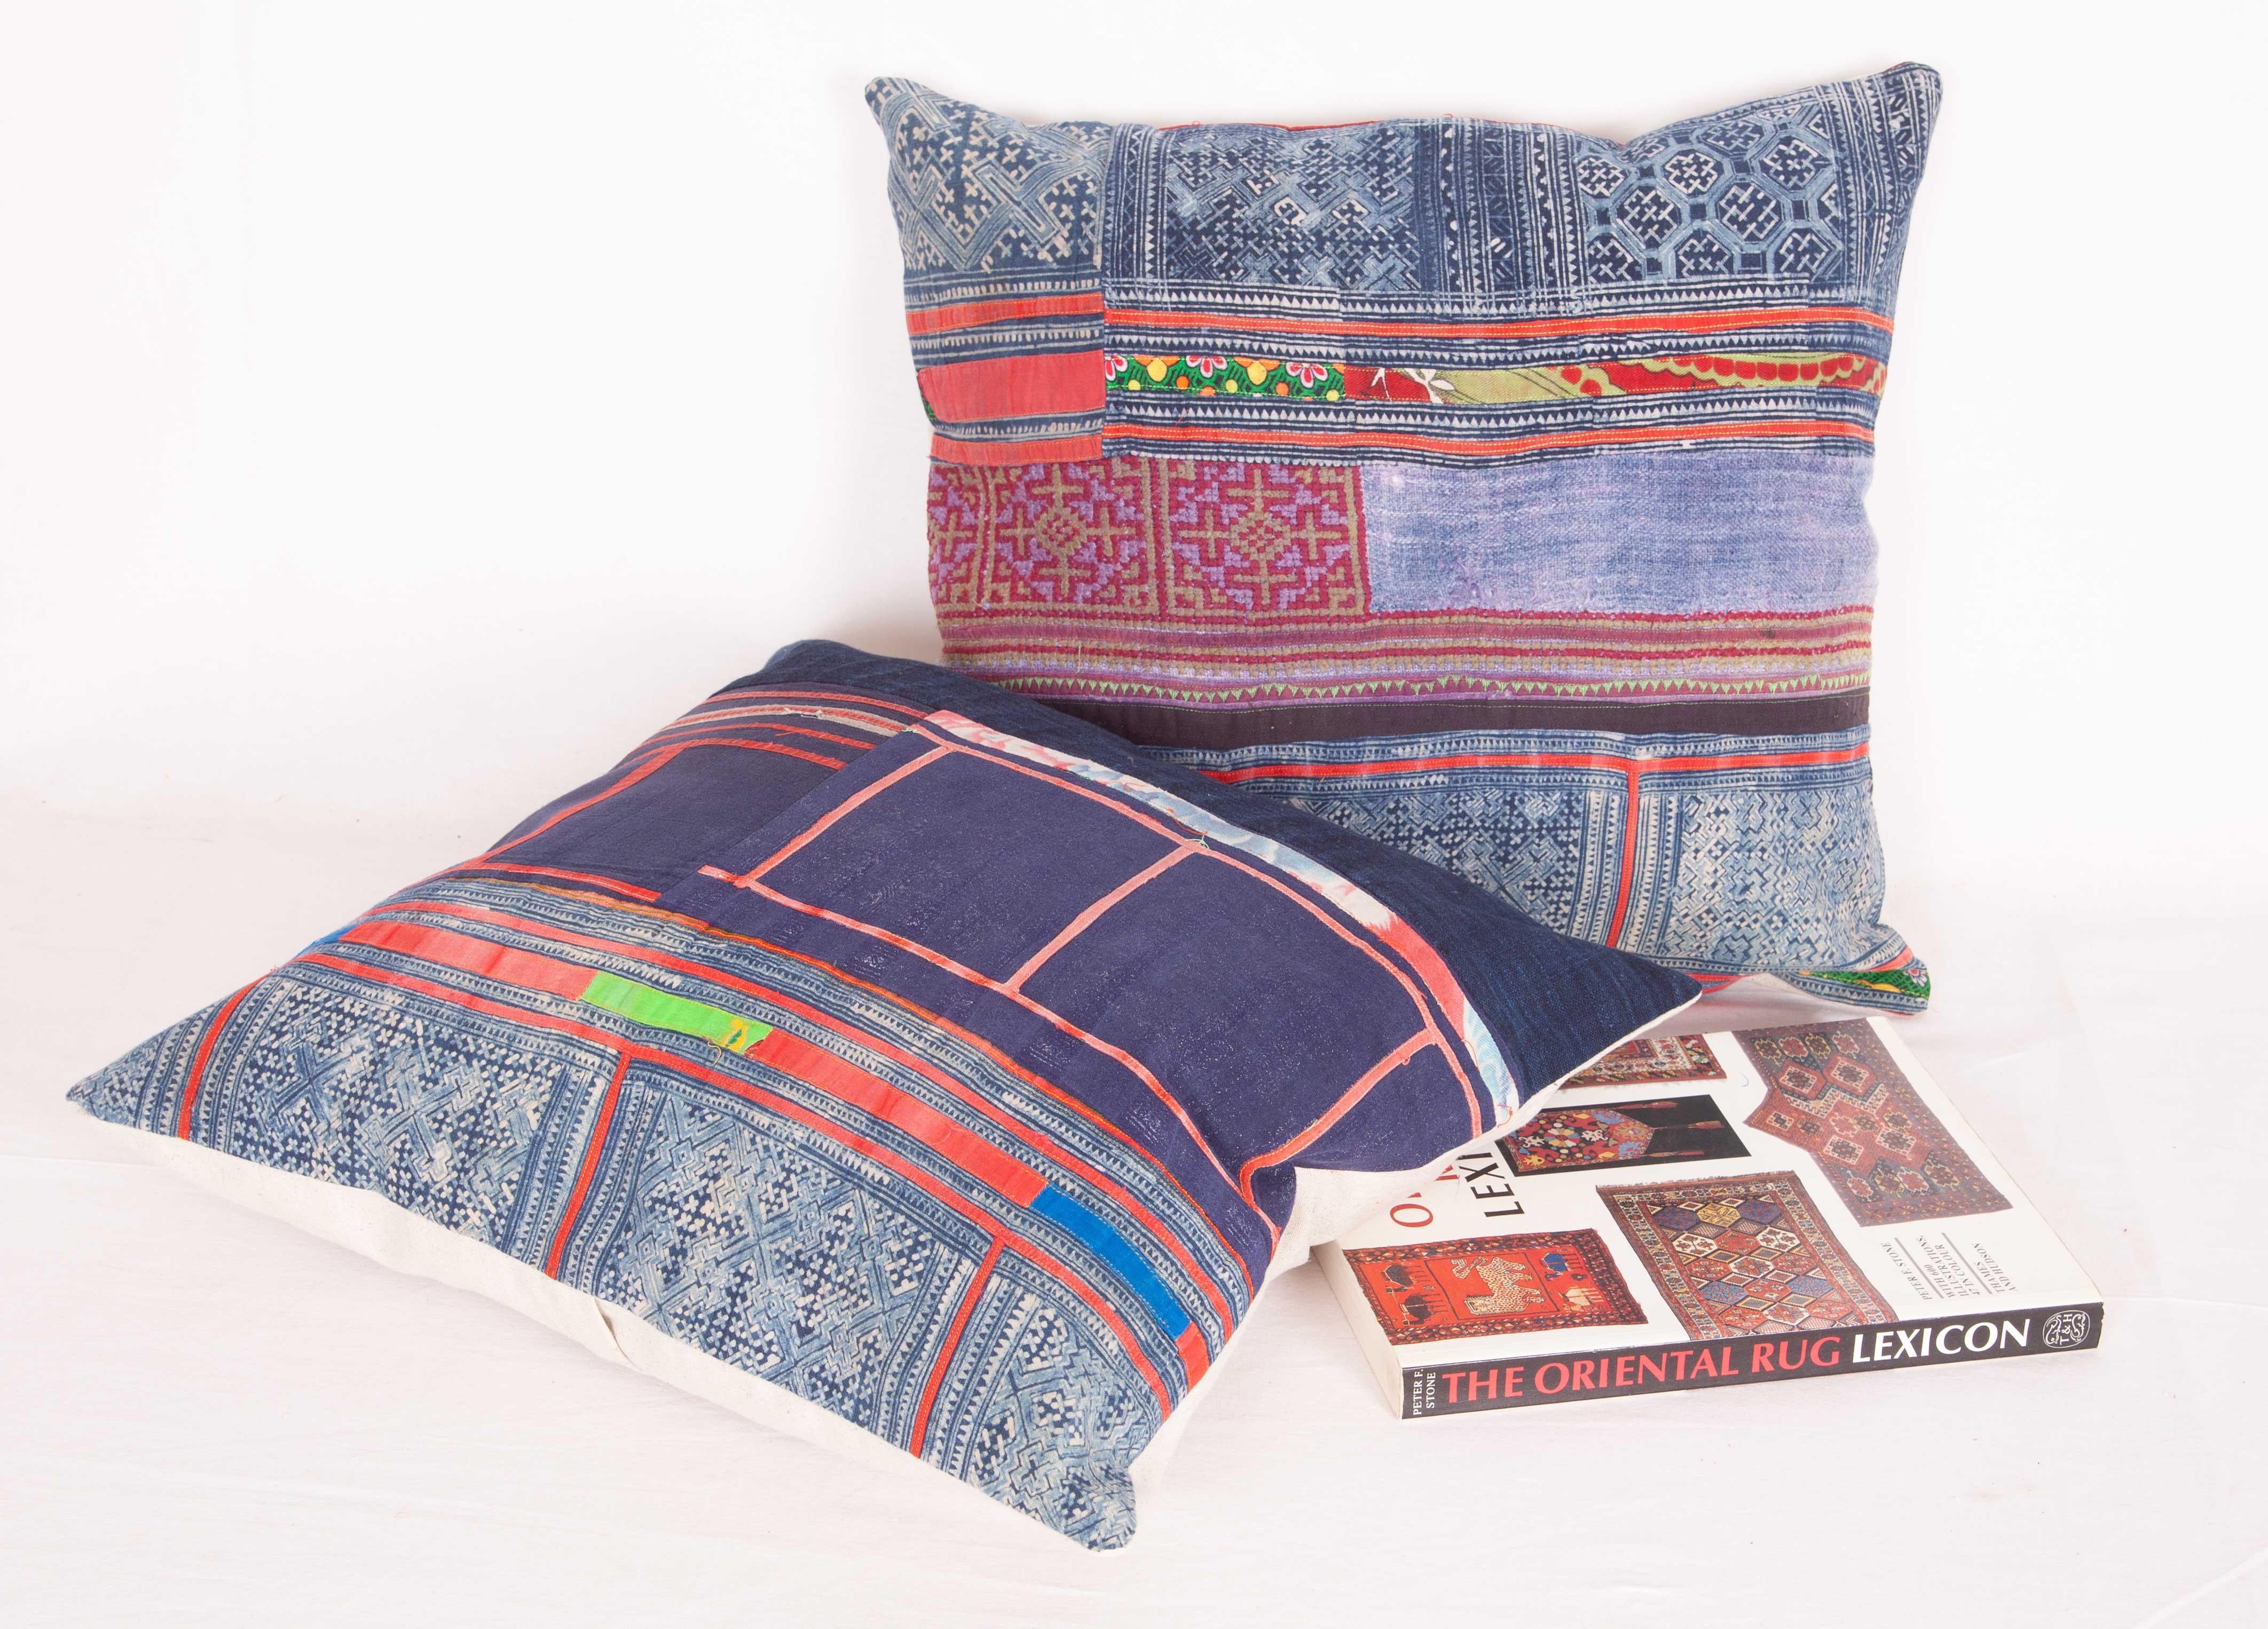 Tribal Vintage Pillow Cases / Cushions Made from a Hmong Hill Tribe Batik Textile